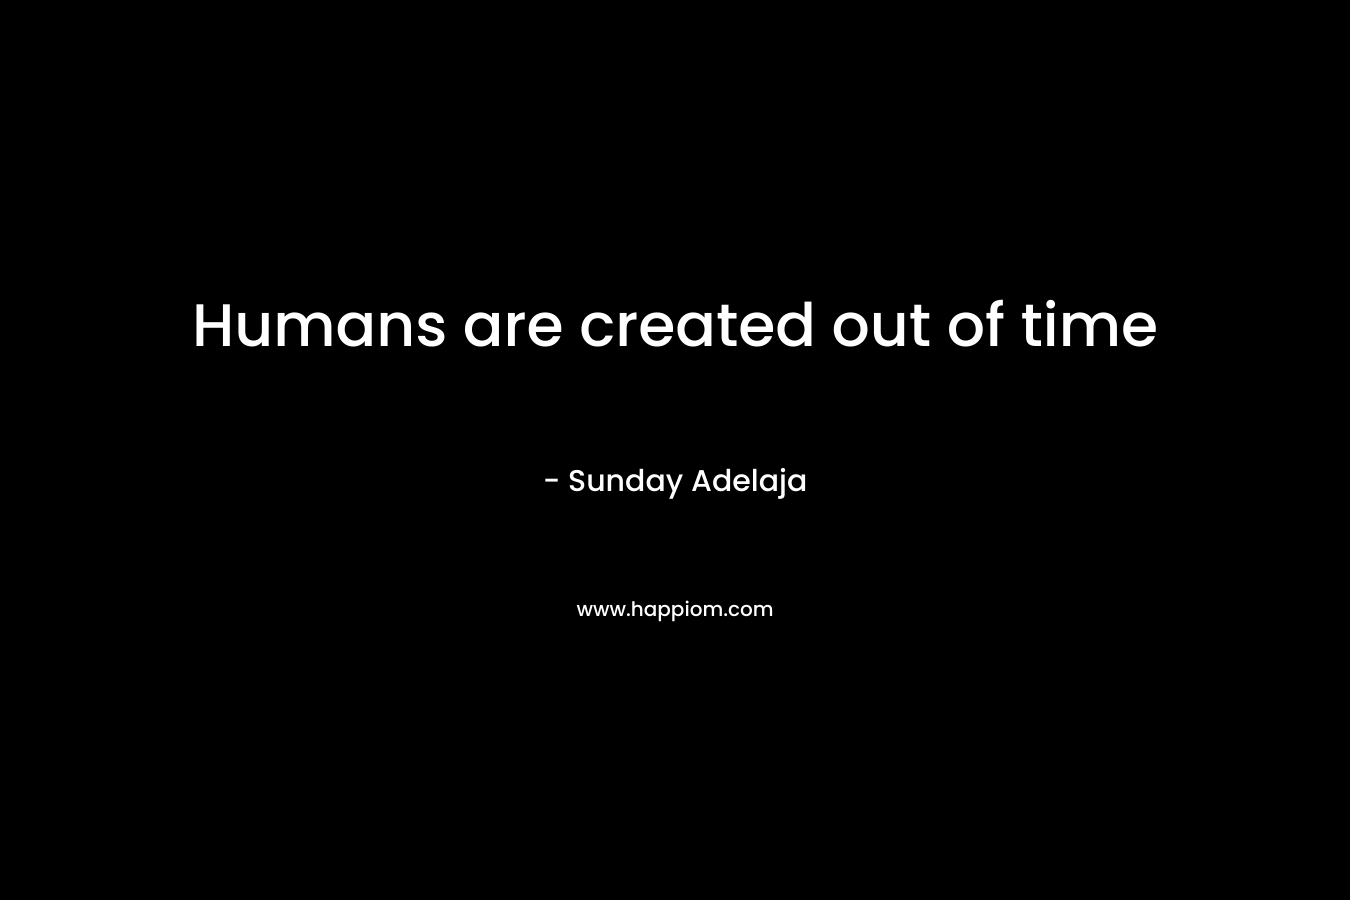 Humans are created out of time